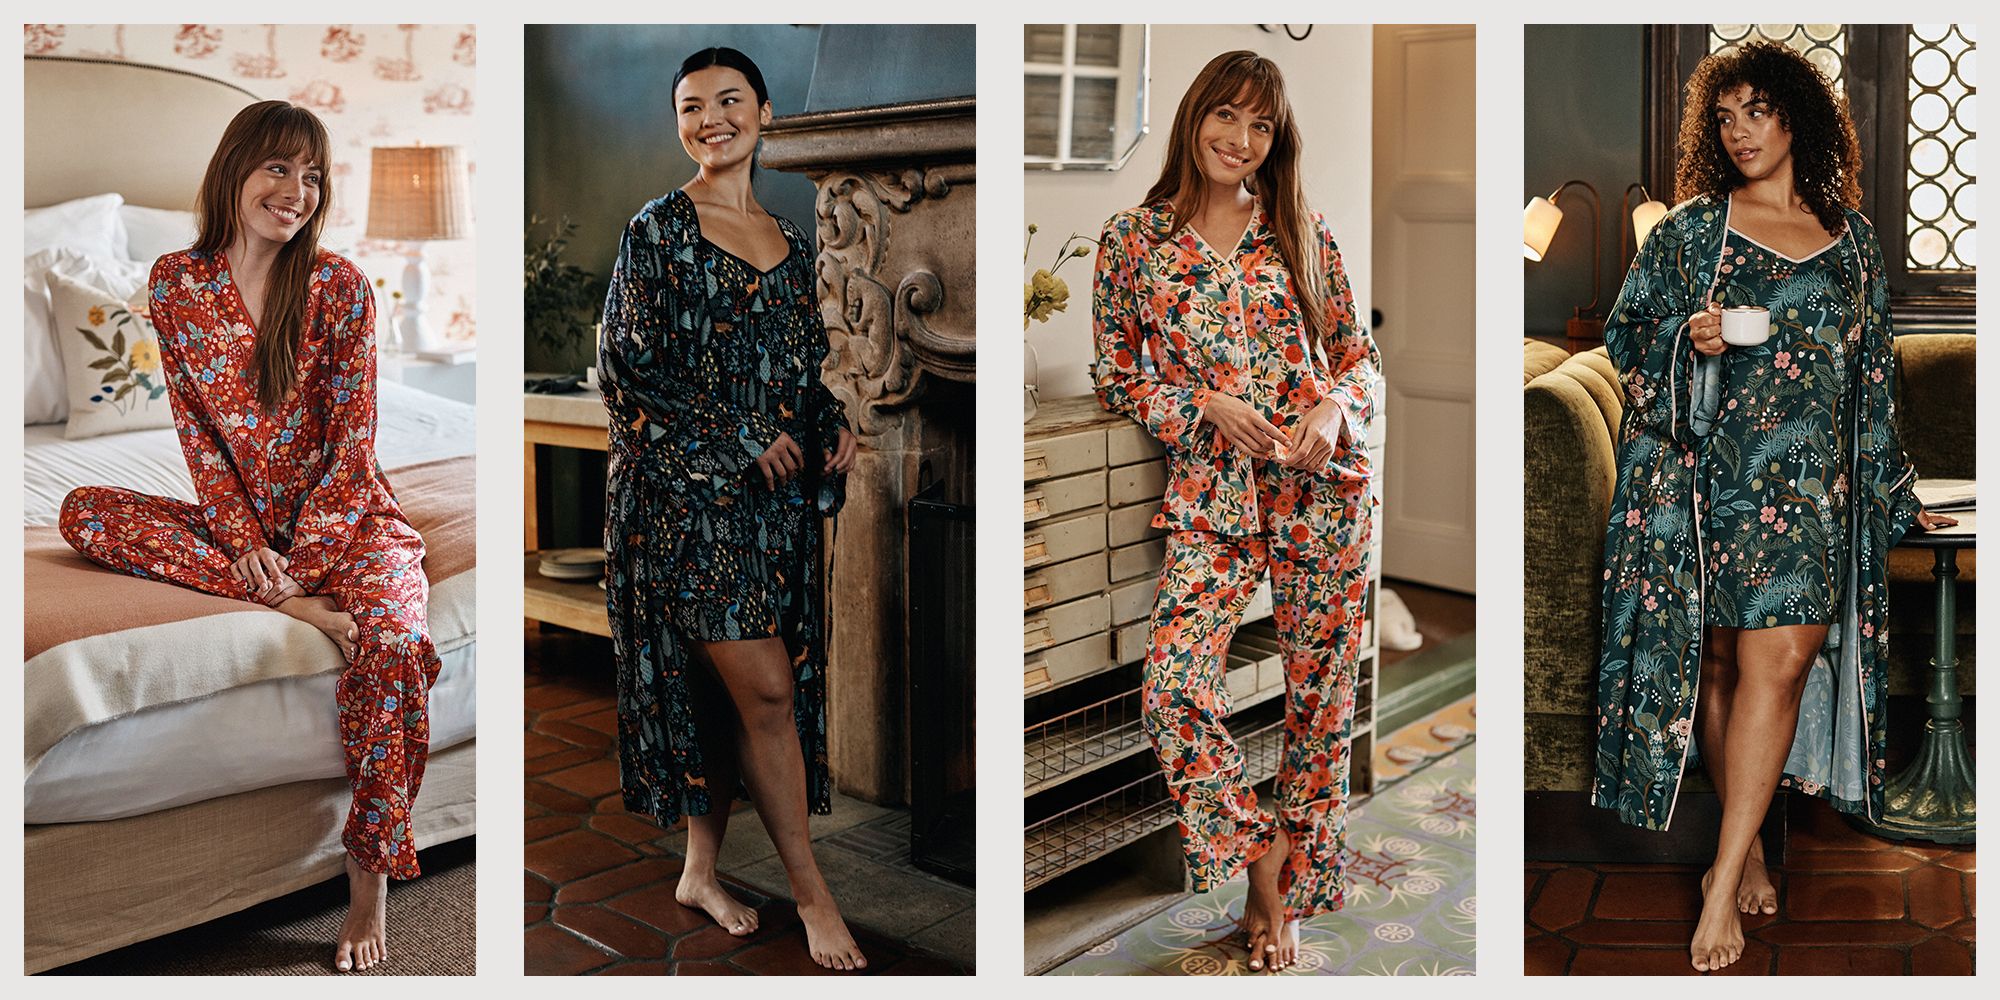 Rifle Paper Co. and Summersalt Collaborate on a Sleepwear Collection